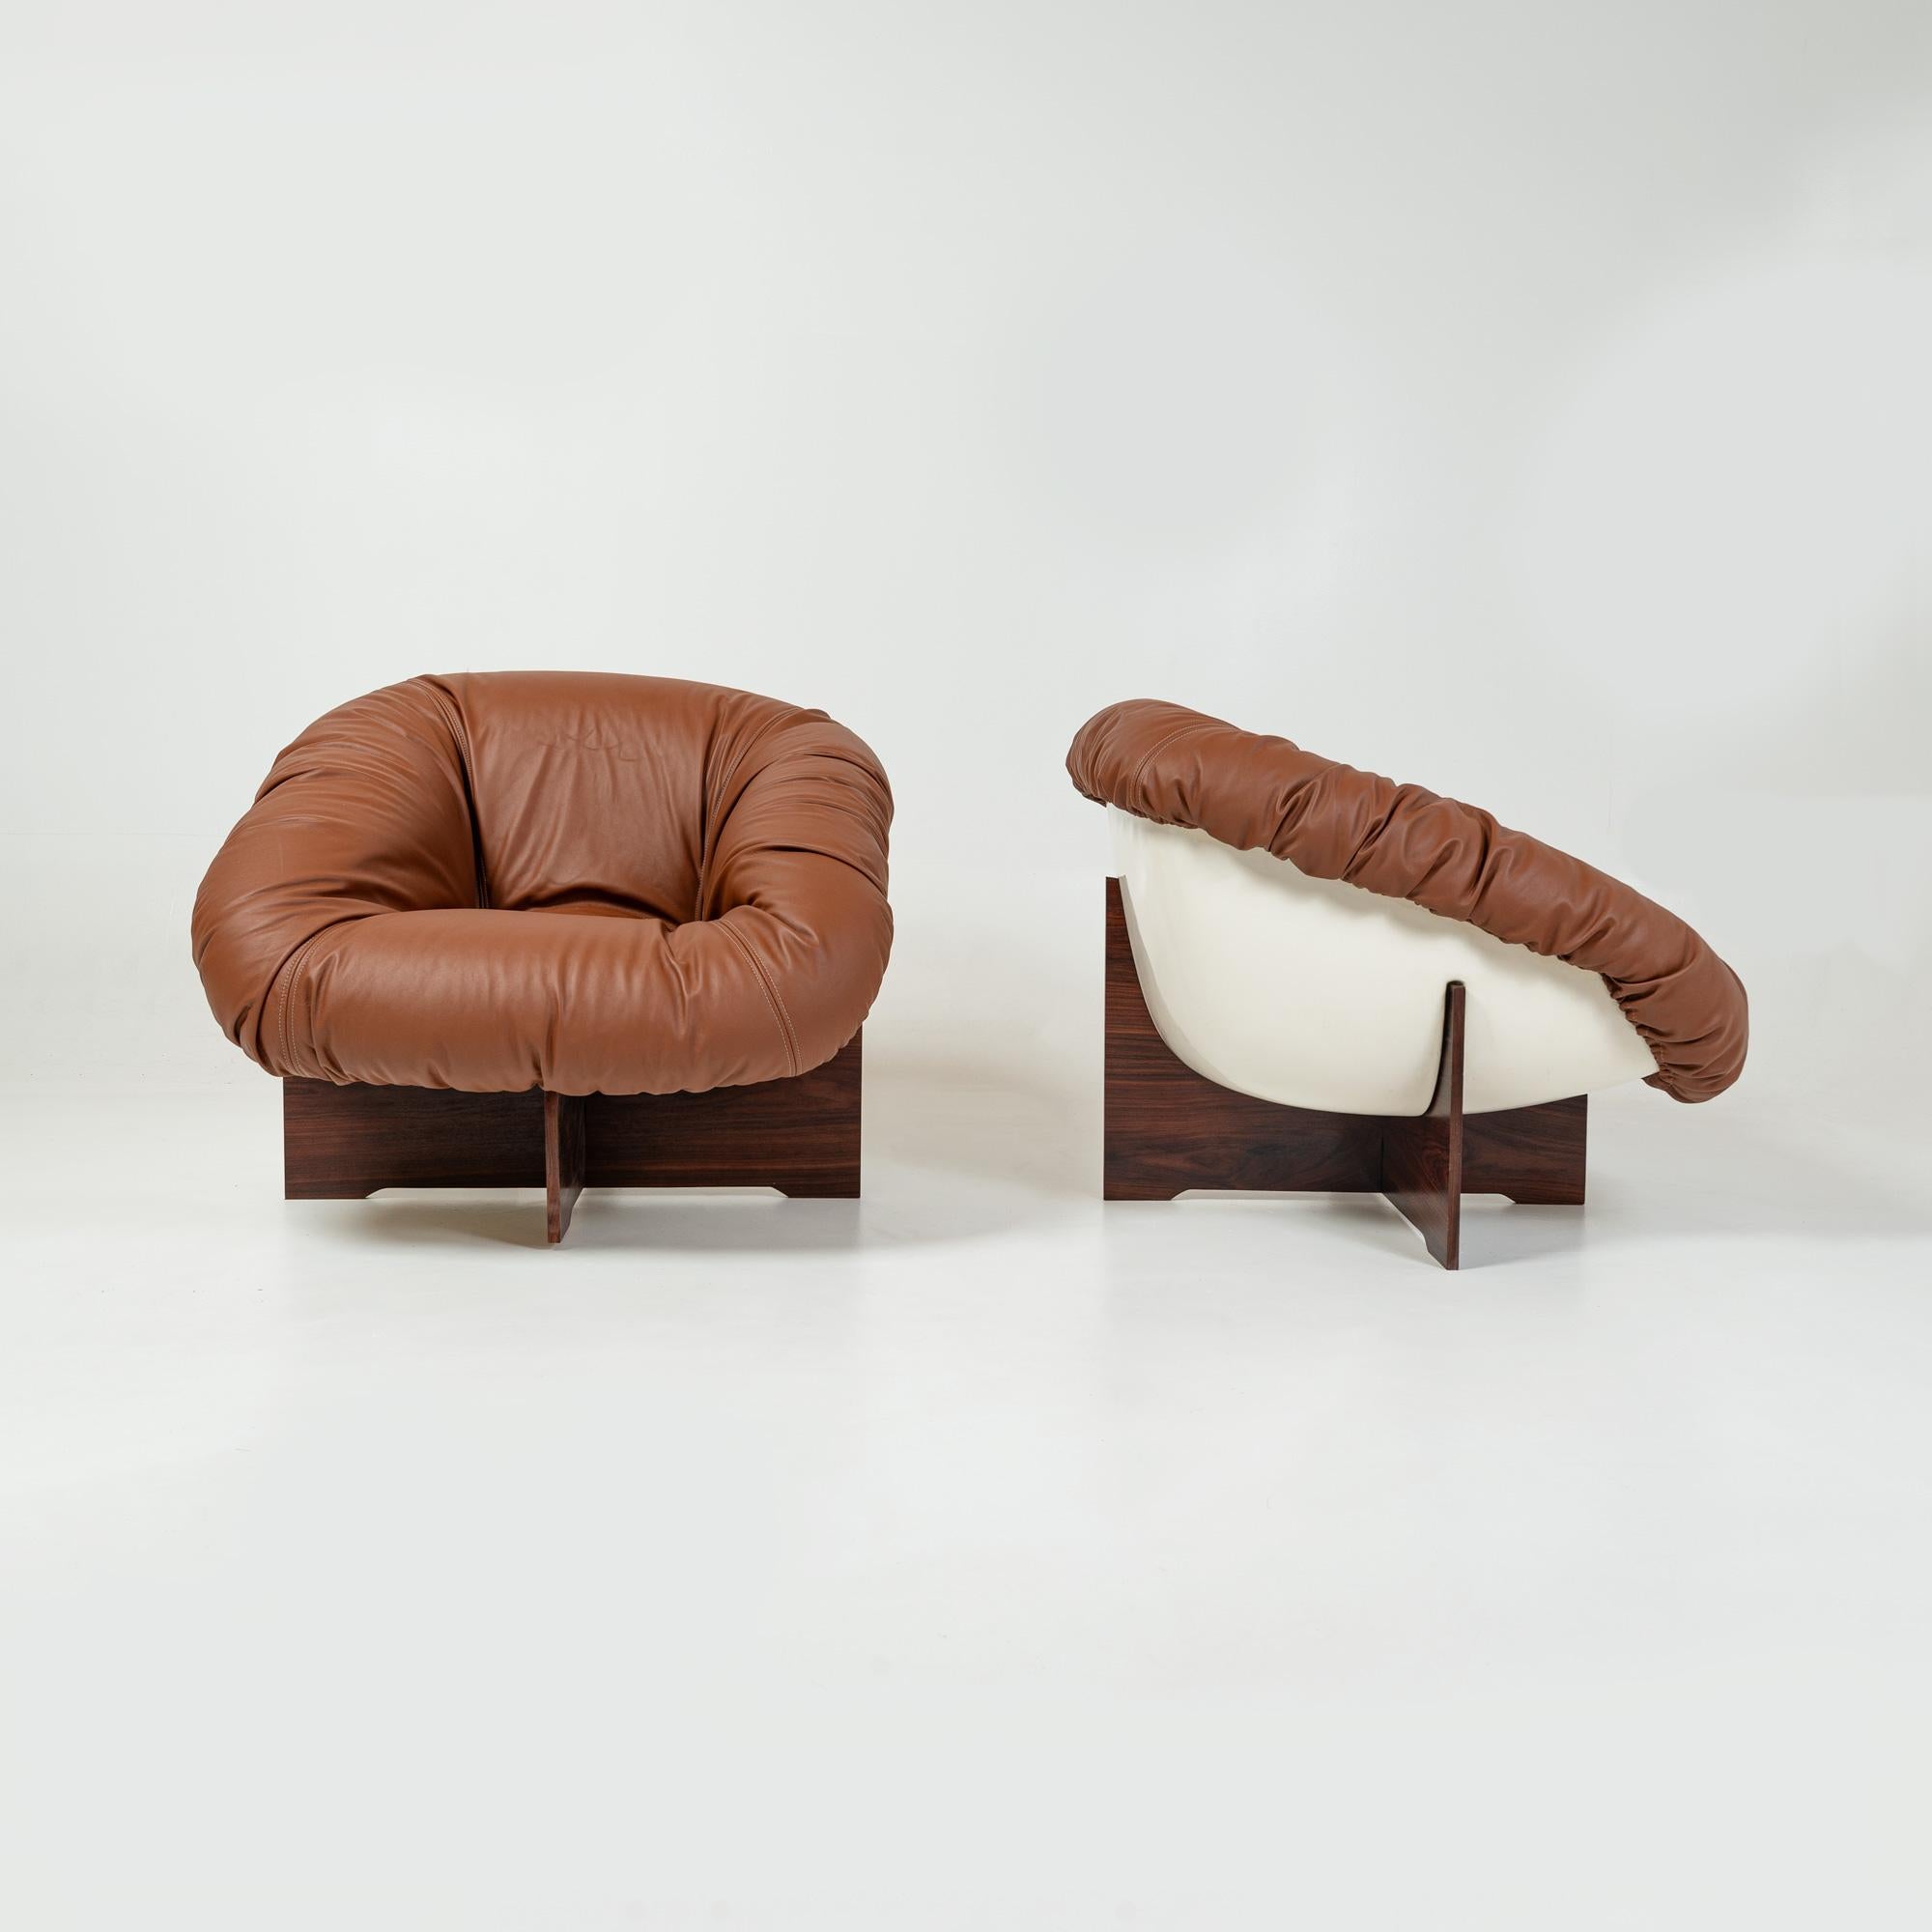 Percival Lafer's Lounge Chair model MP-61 in Maharam Leather and Rosewood, 1973 For Sale 7